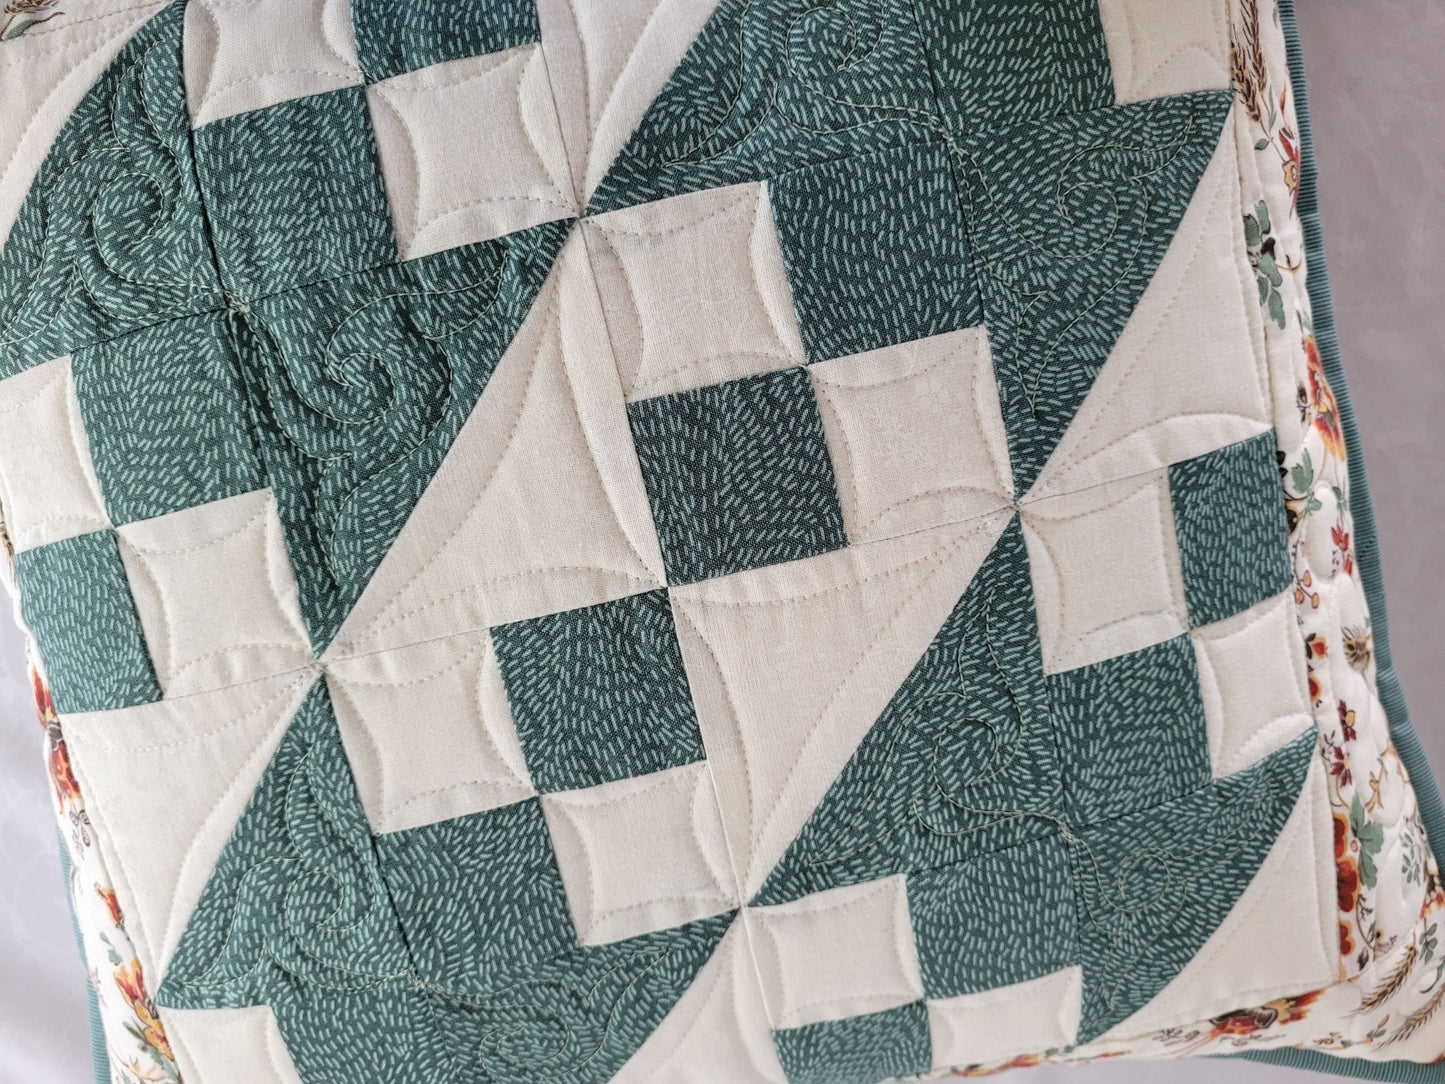 quilted pillow in teal and white